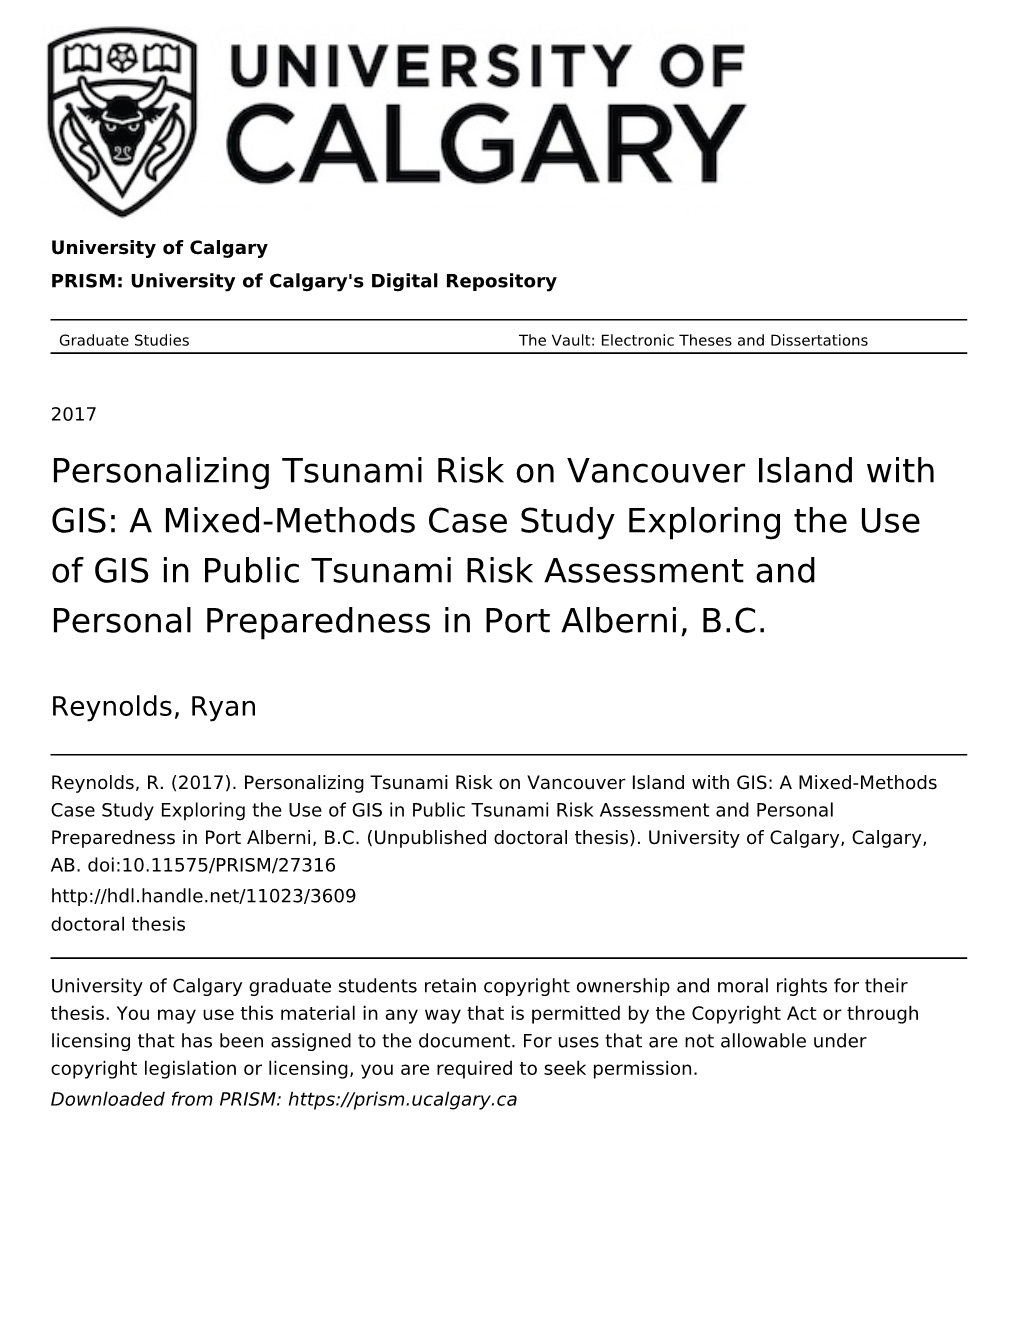 Personalizing Tsunami Risk on Vancouver Island with GIS: a Mixed